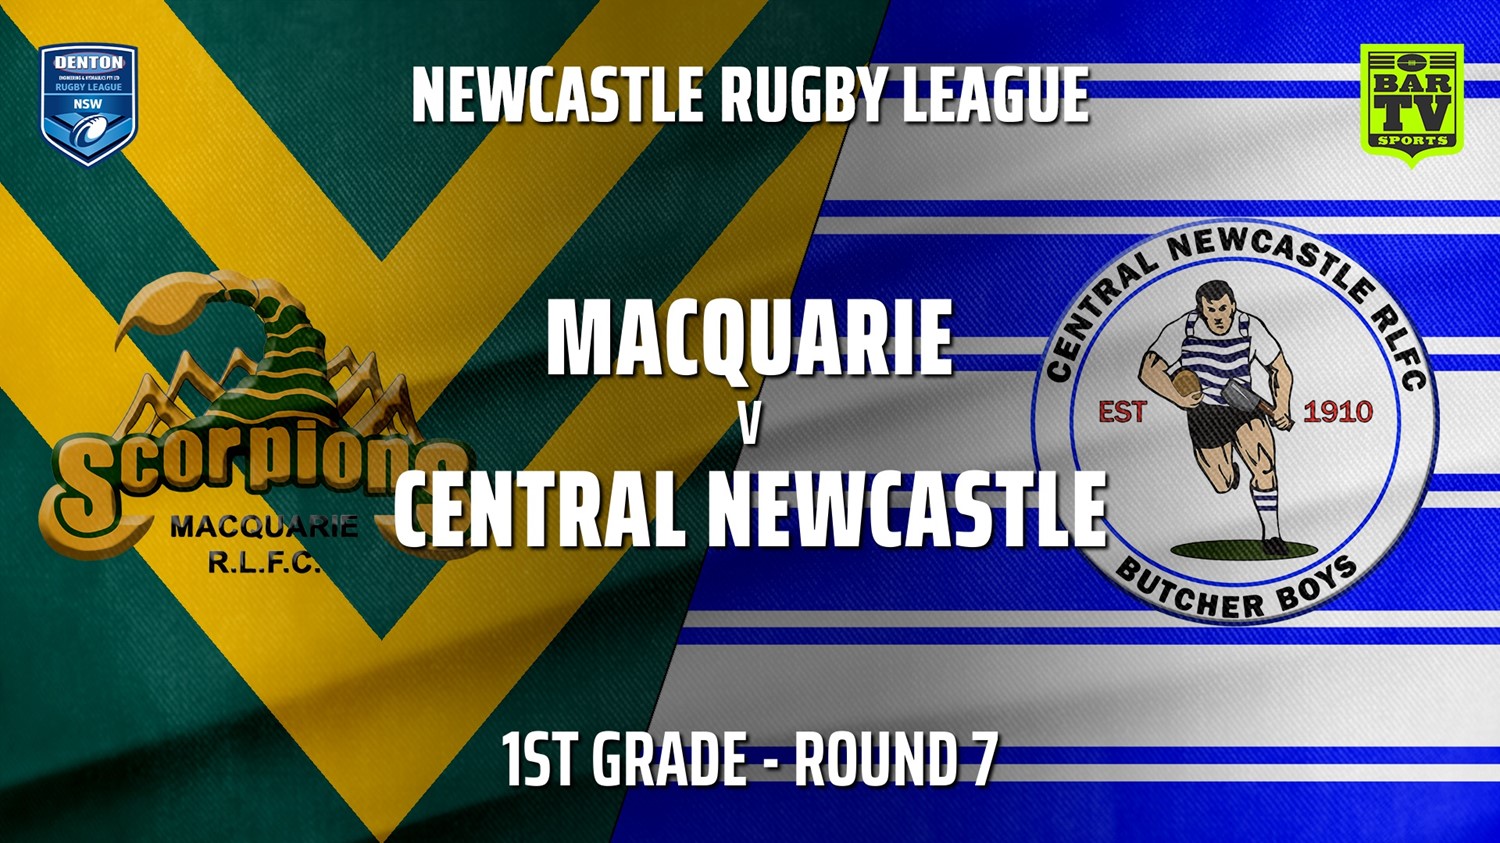 210509-Newcastle Rugby League Round 7 - 1st Grade - Macquarie Scorpions v Central Newcastle Minigame Slate Image